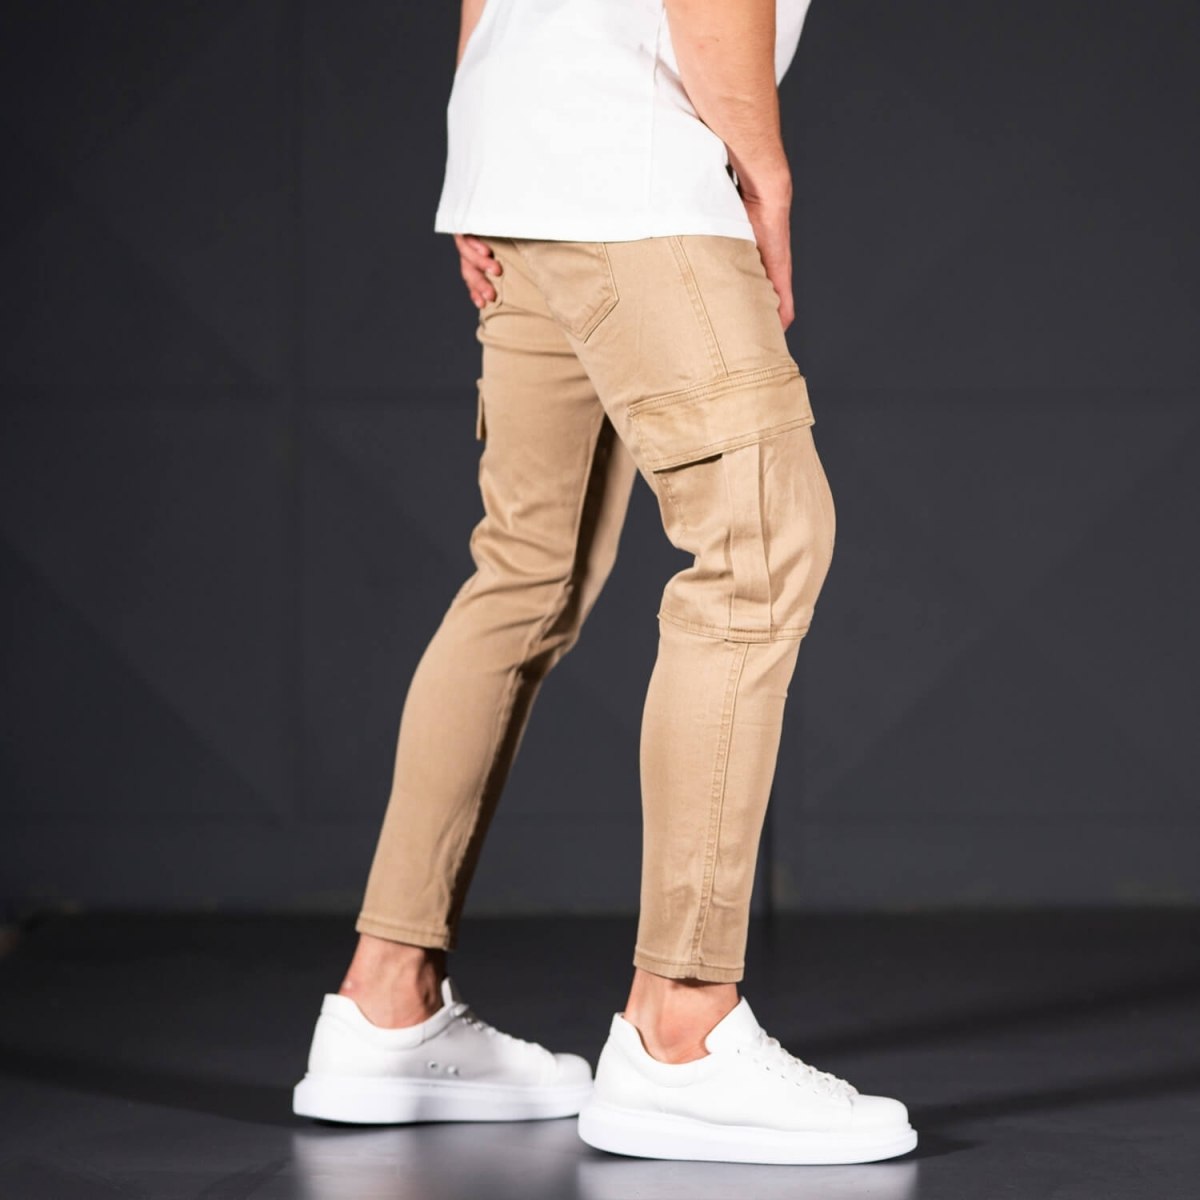 Men's Jeans with Pockets Style in Camel - 2